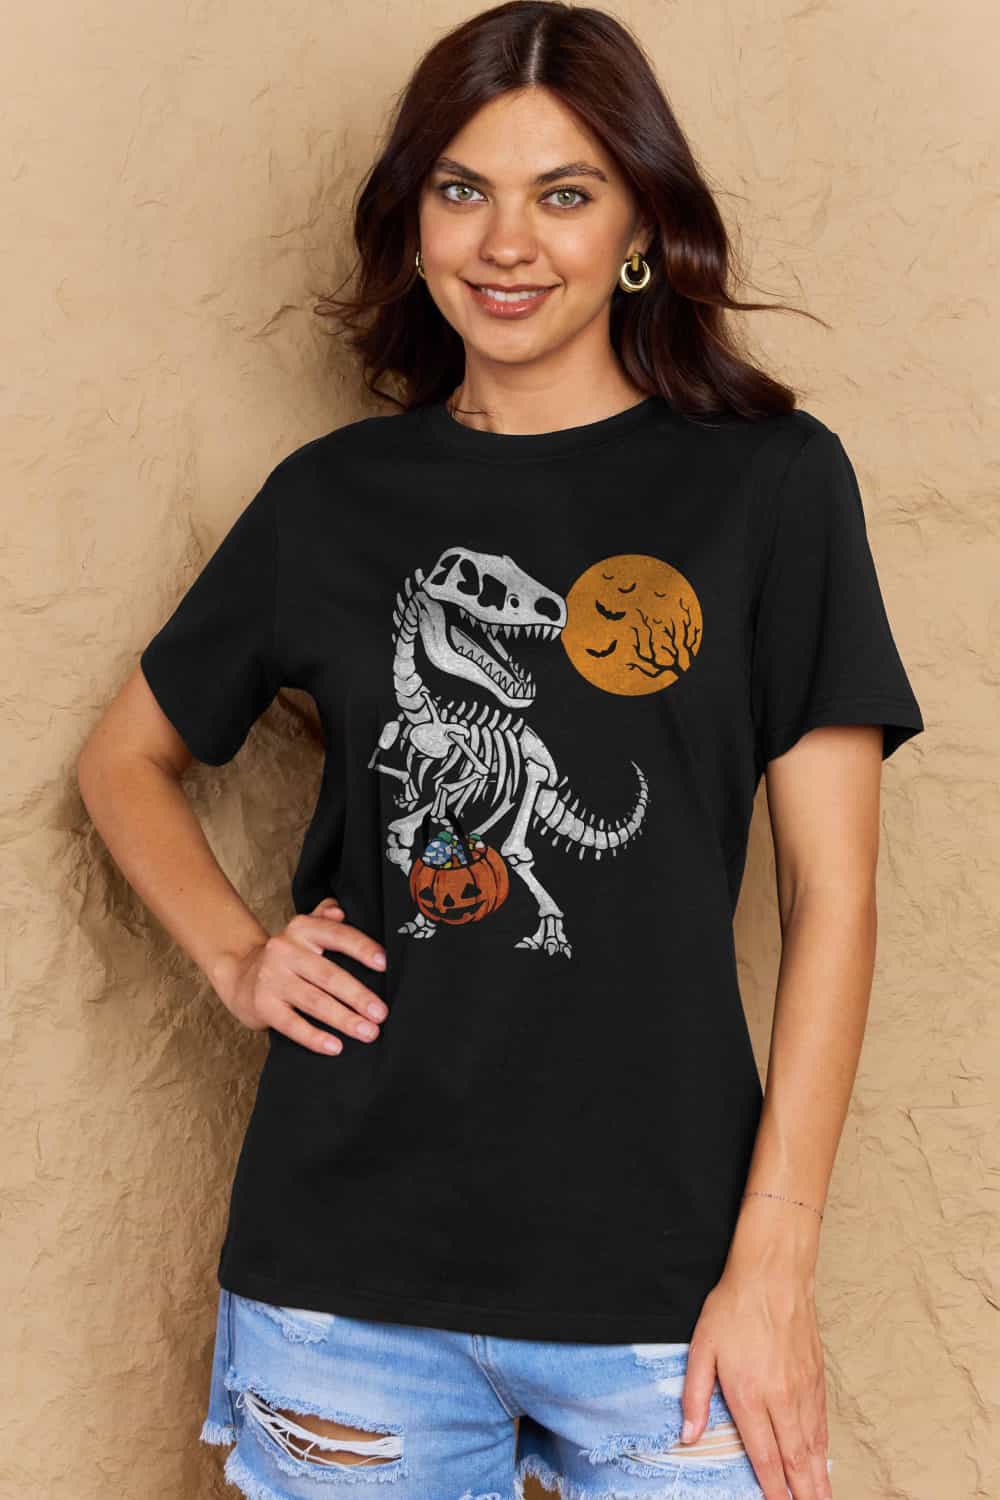 Simply Love Full Size Dinosaur Skeleton Graphic Cotton T-Shirt from Fierce Fusion